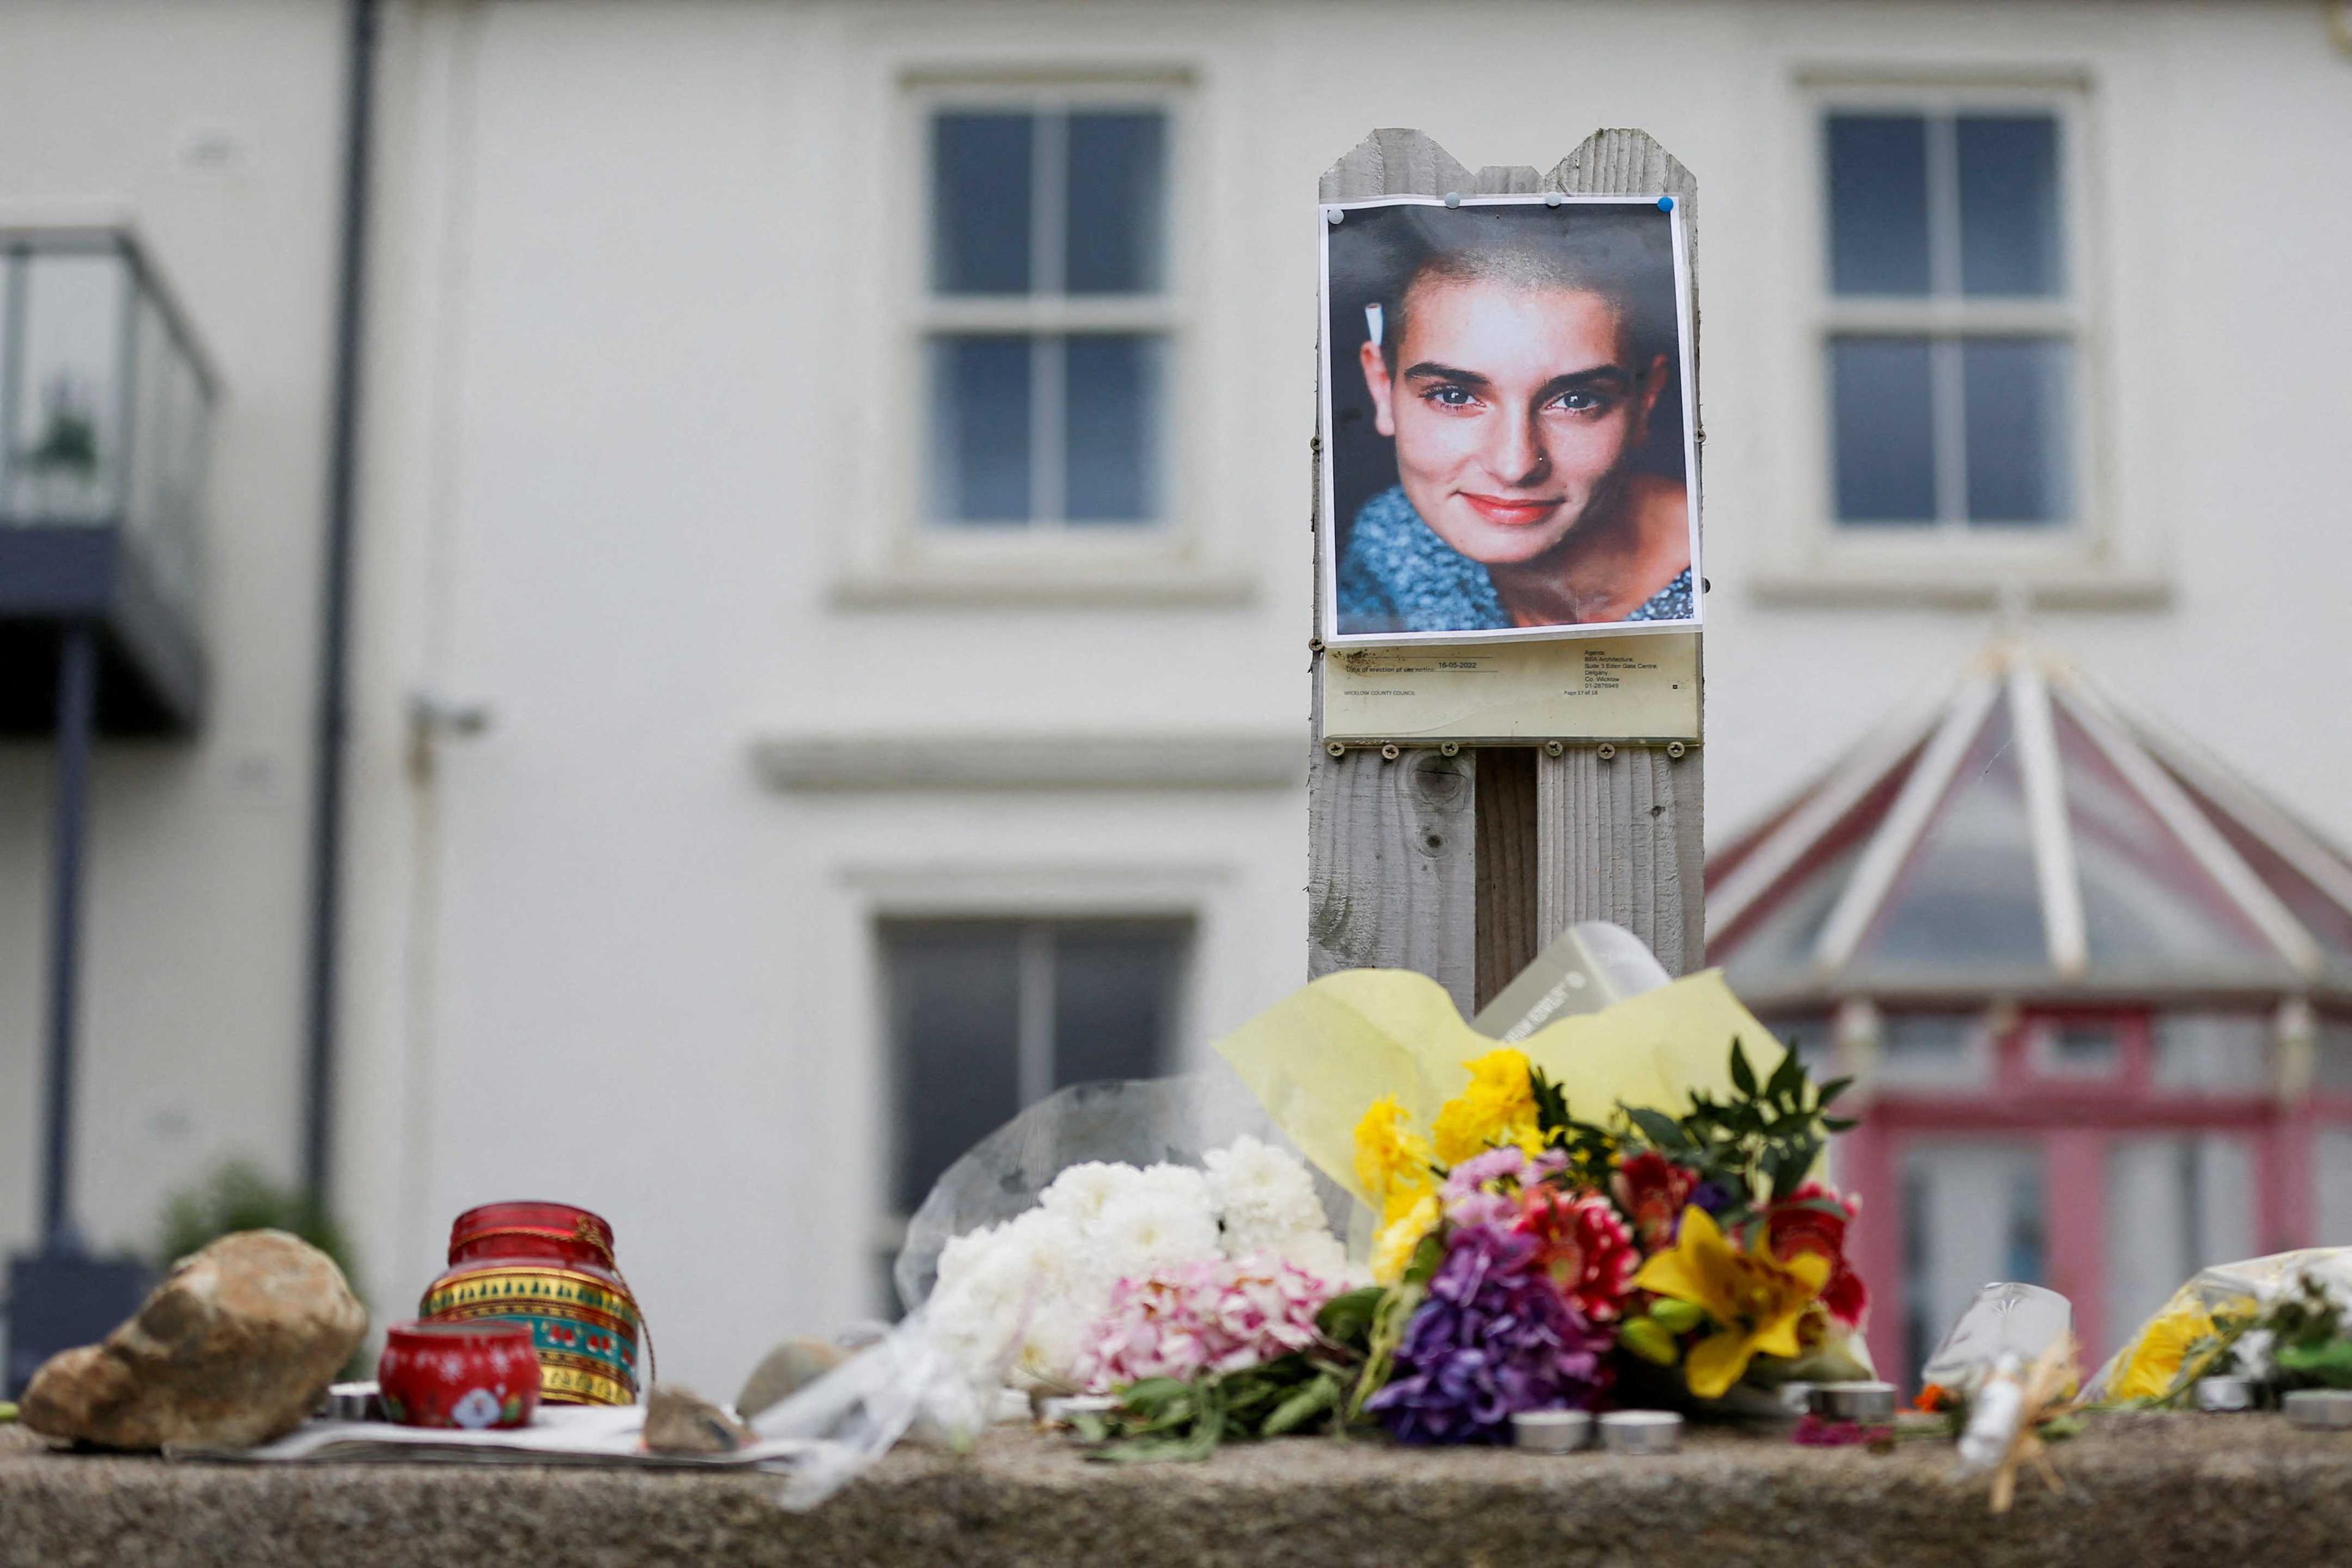 A picture of late singer Sinead O'Connor, who died at the age of 56, is placed around floral tributes outside her former Irish home, in the seaside town of Bray in County Wicklow, Ireland, July 27. Photo: Reuters